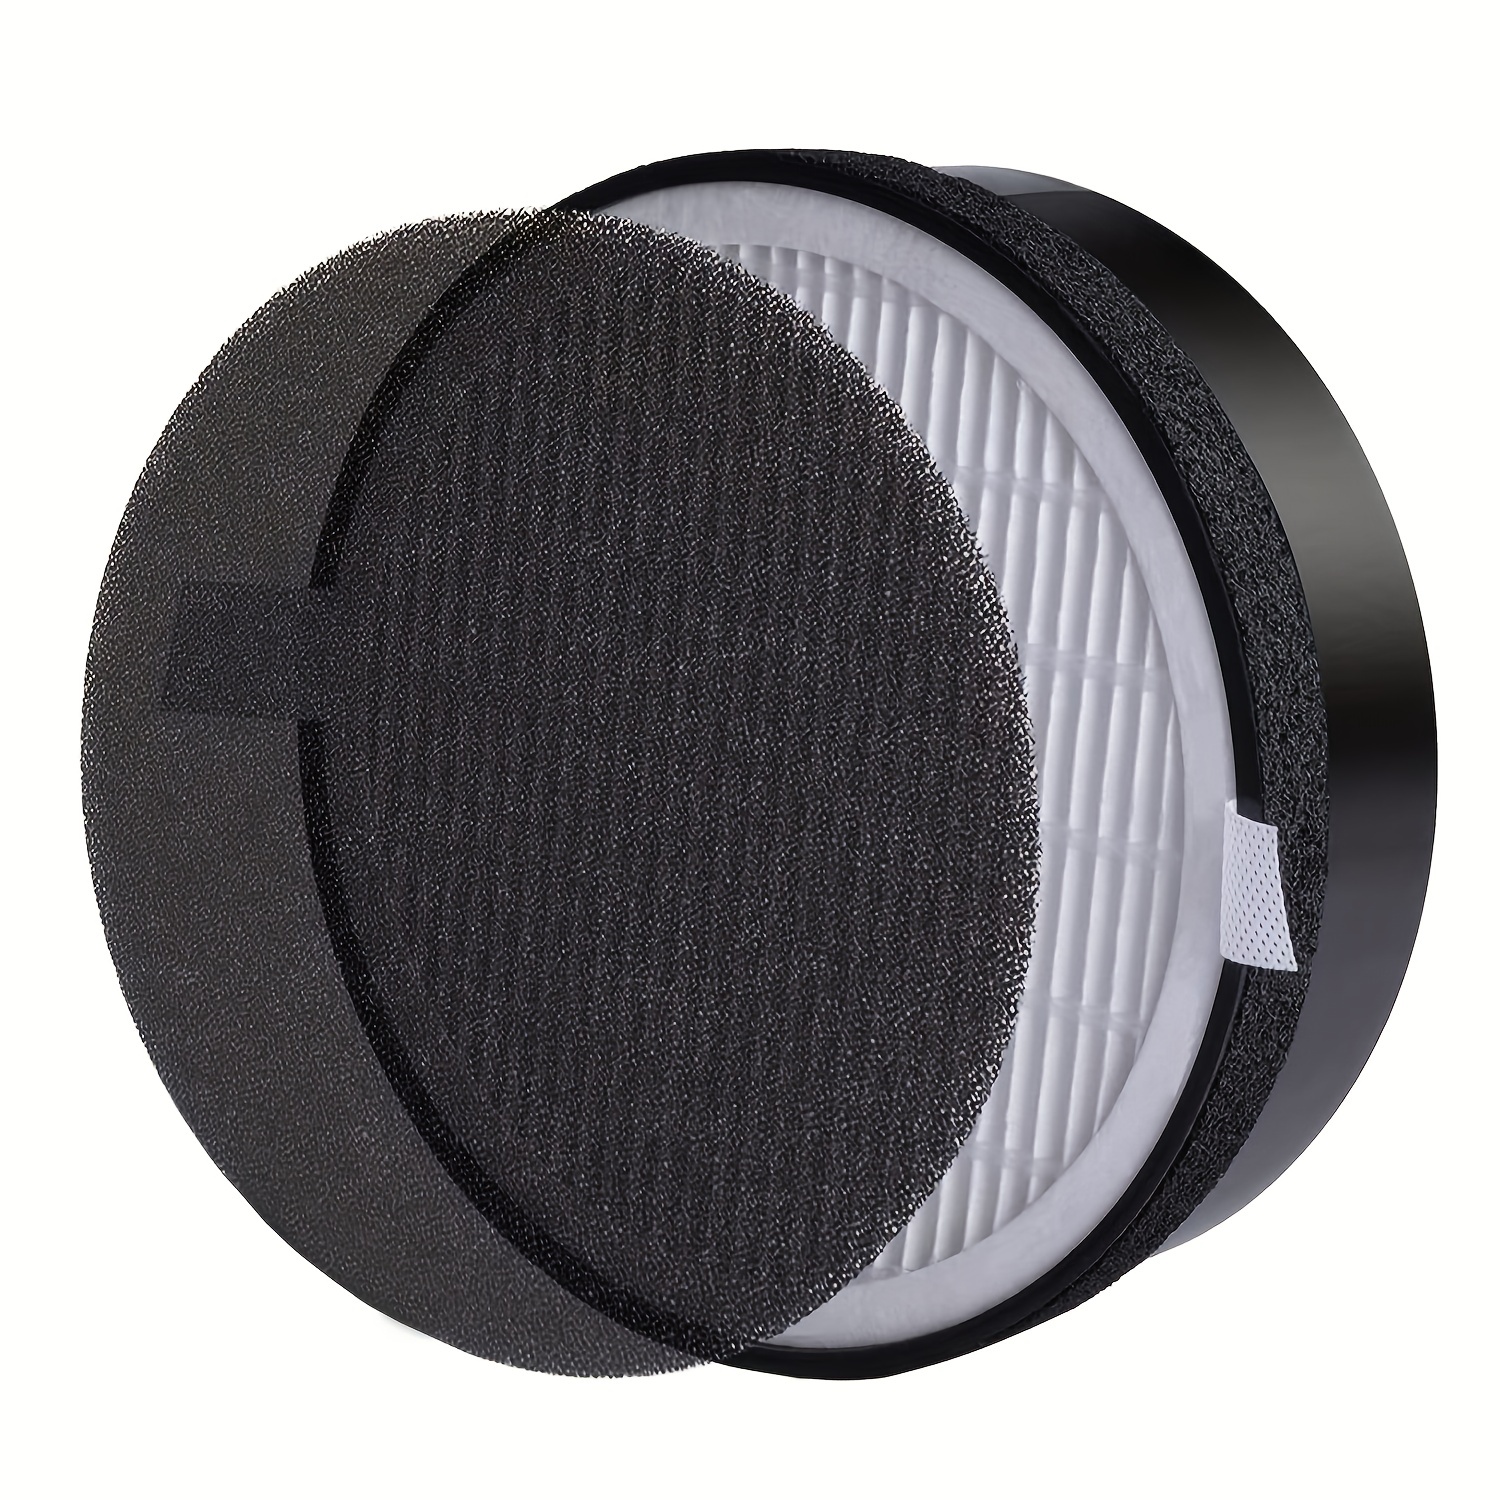 LV-H128 Replacement Filter Compatible with LEVOIT LV-H128, PUURVSAS Air  Purifier (HM669A), ROVACS (RV60), Replace Part# LV-H128-RF, 2 Packs